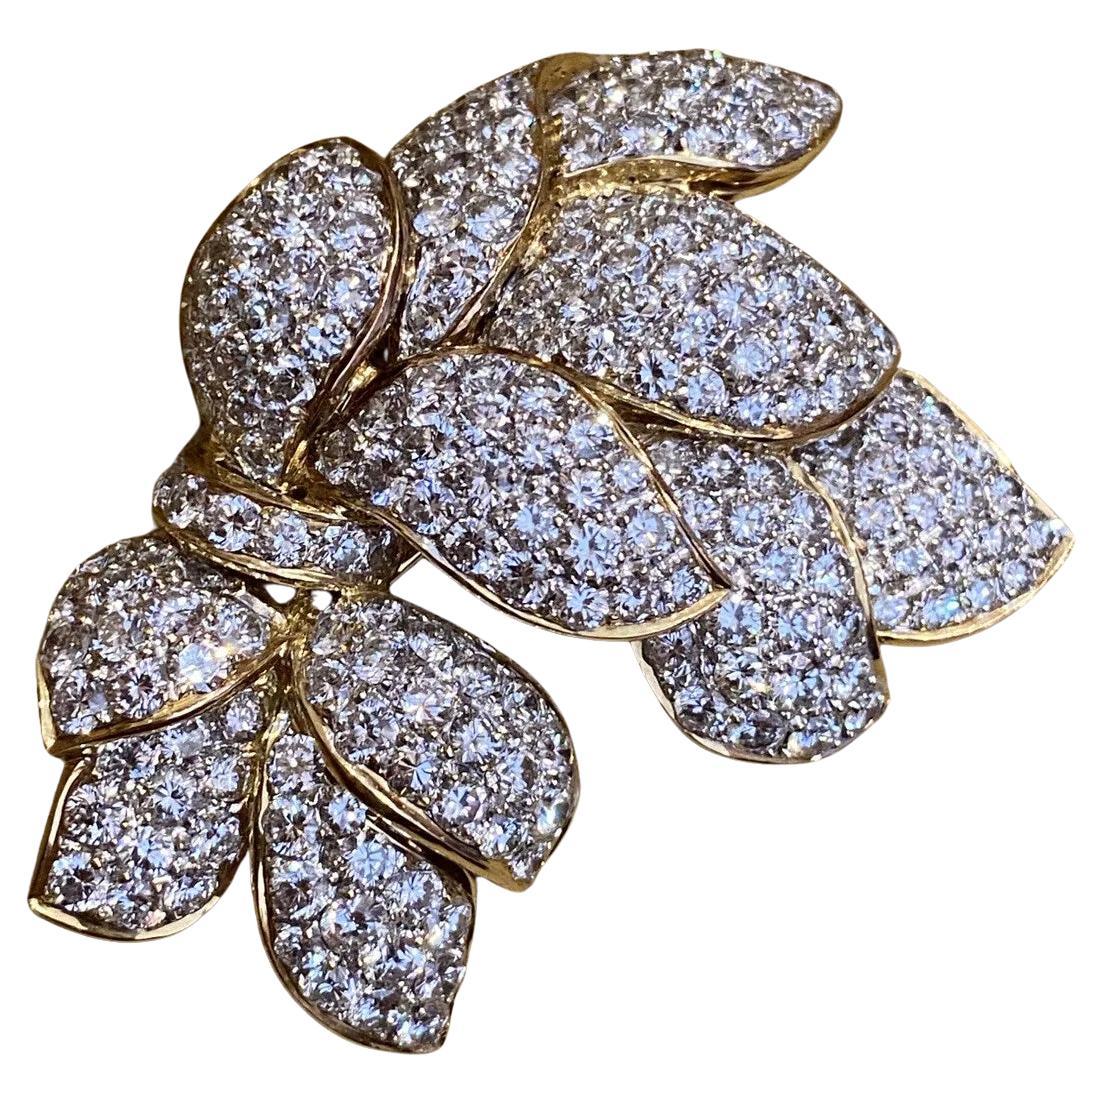 Pave Diamond Floral Spray Pin Brooch 10.86 Carat Total Weight in 18k Yellow Gold